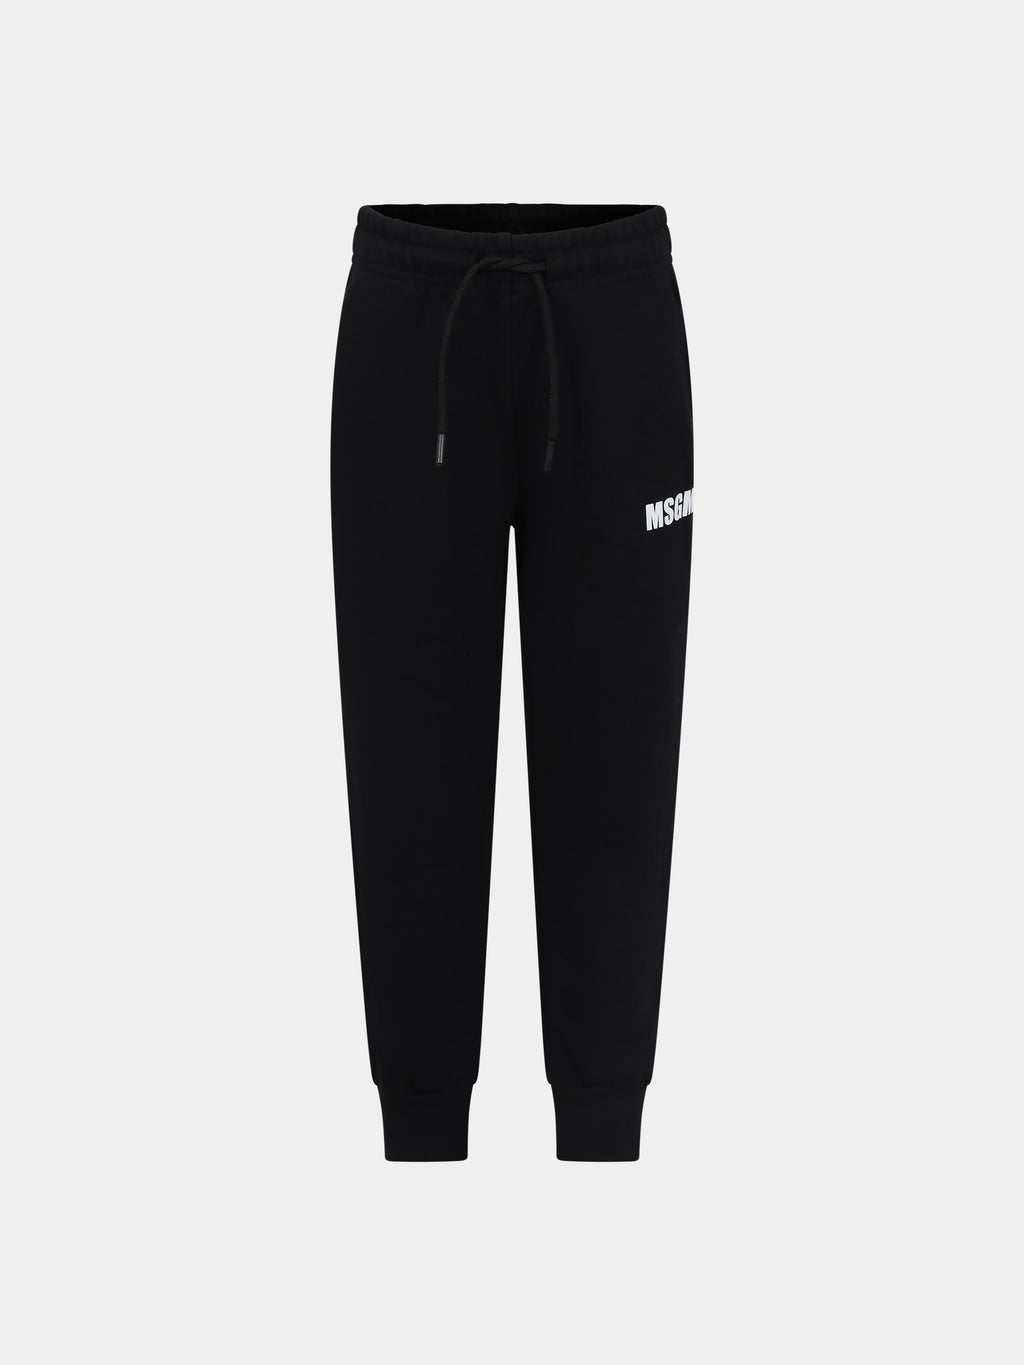 Black trousers for kids with logo